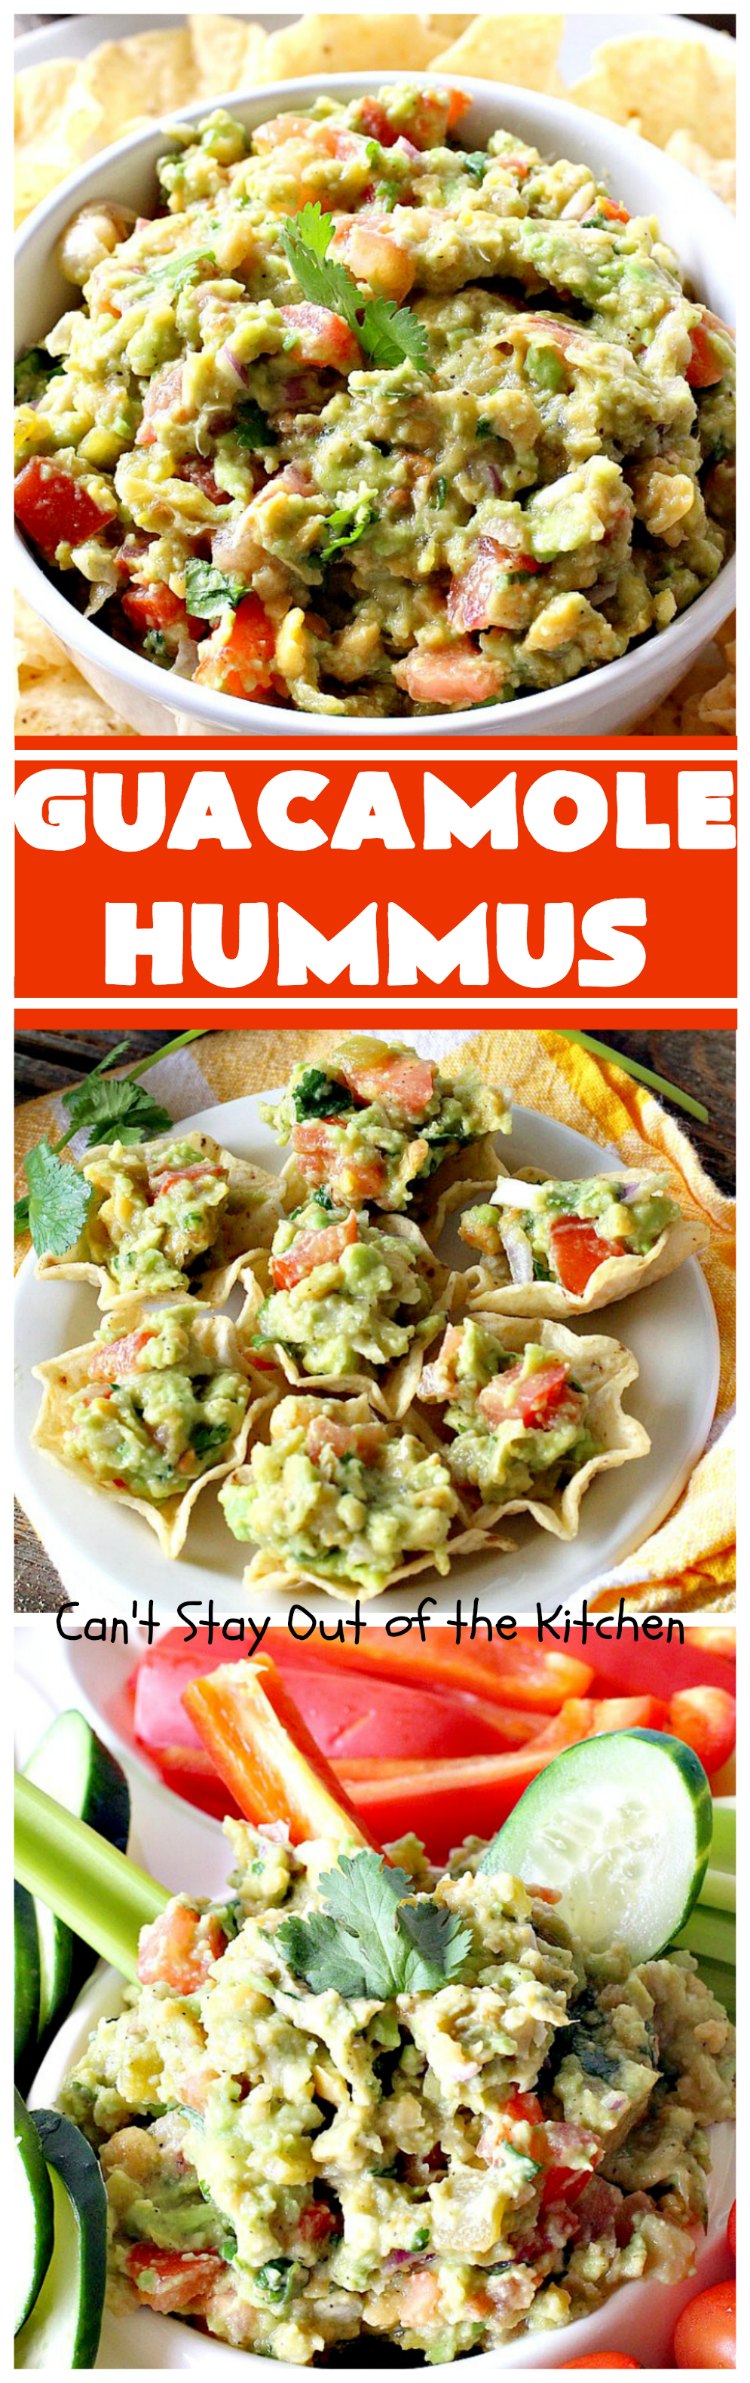 Guacamole Hummus | Can't Stay Out of the Kitchen